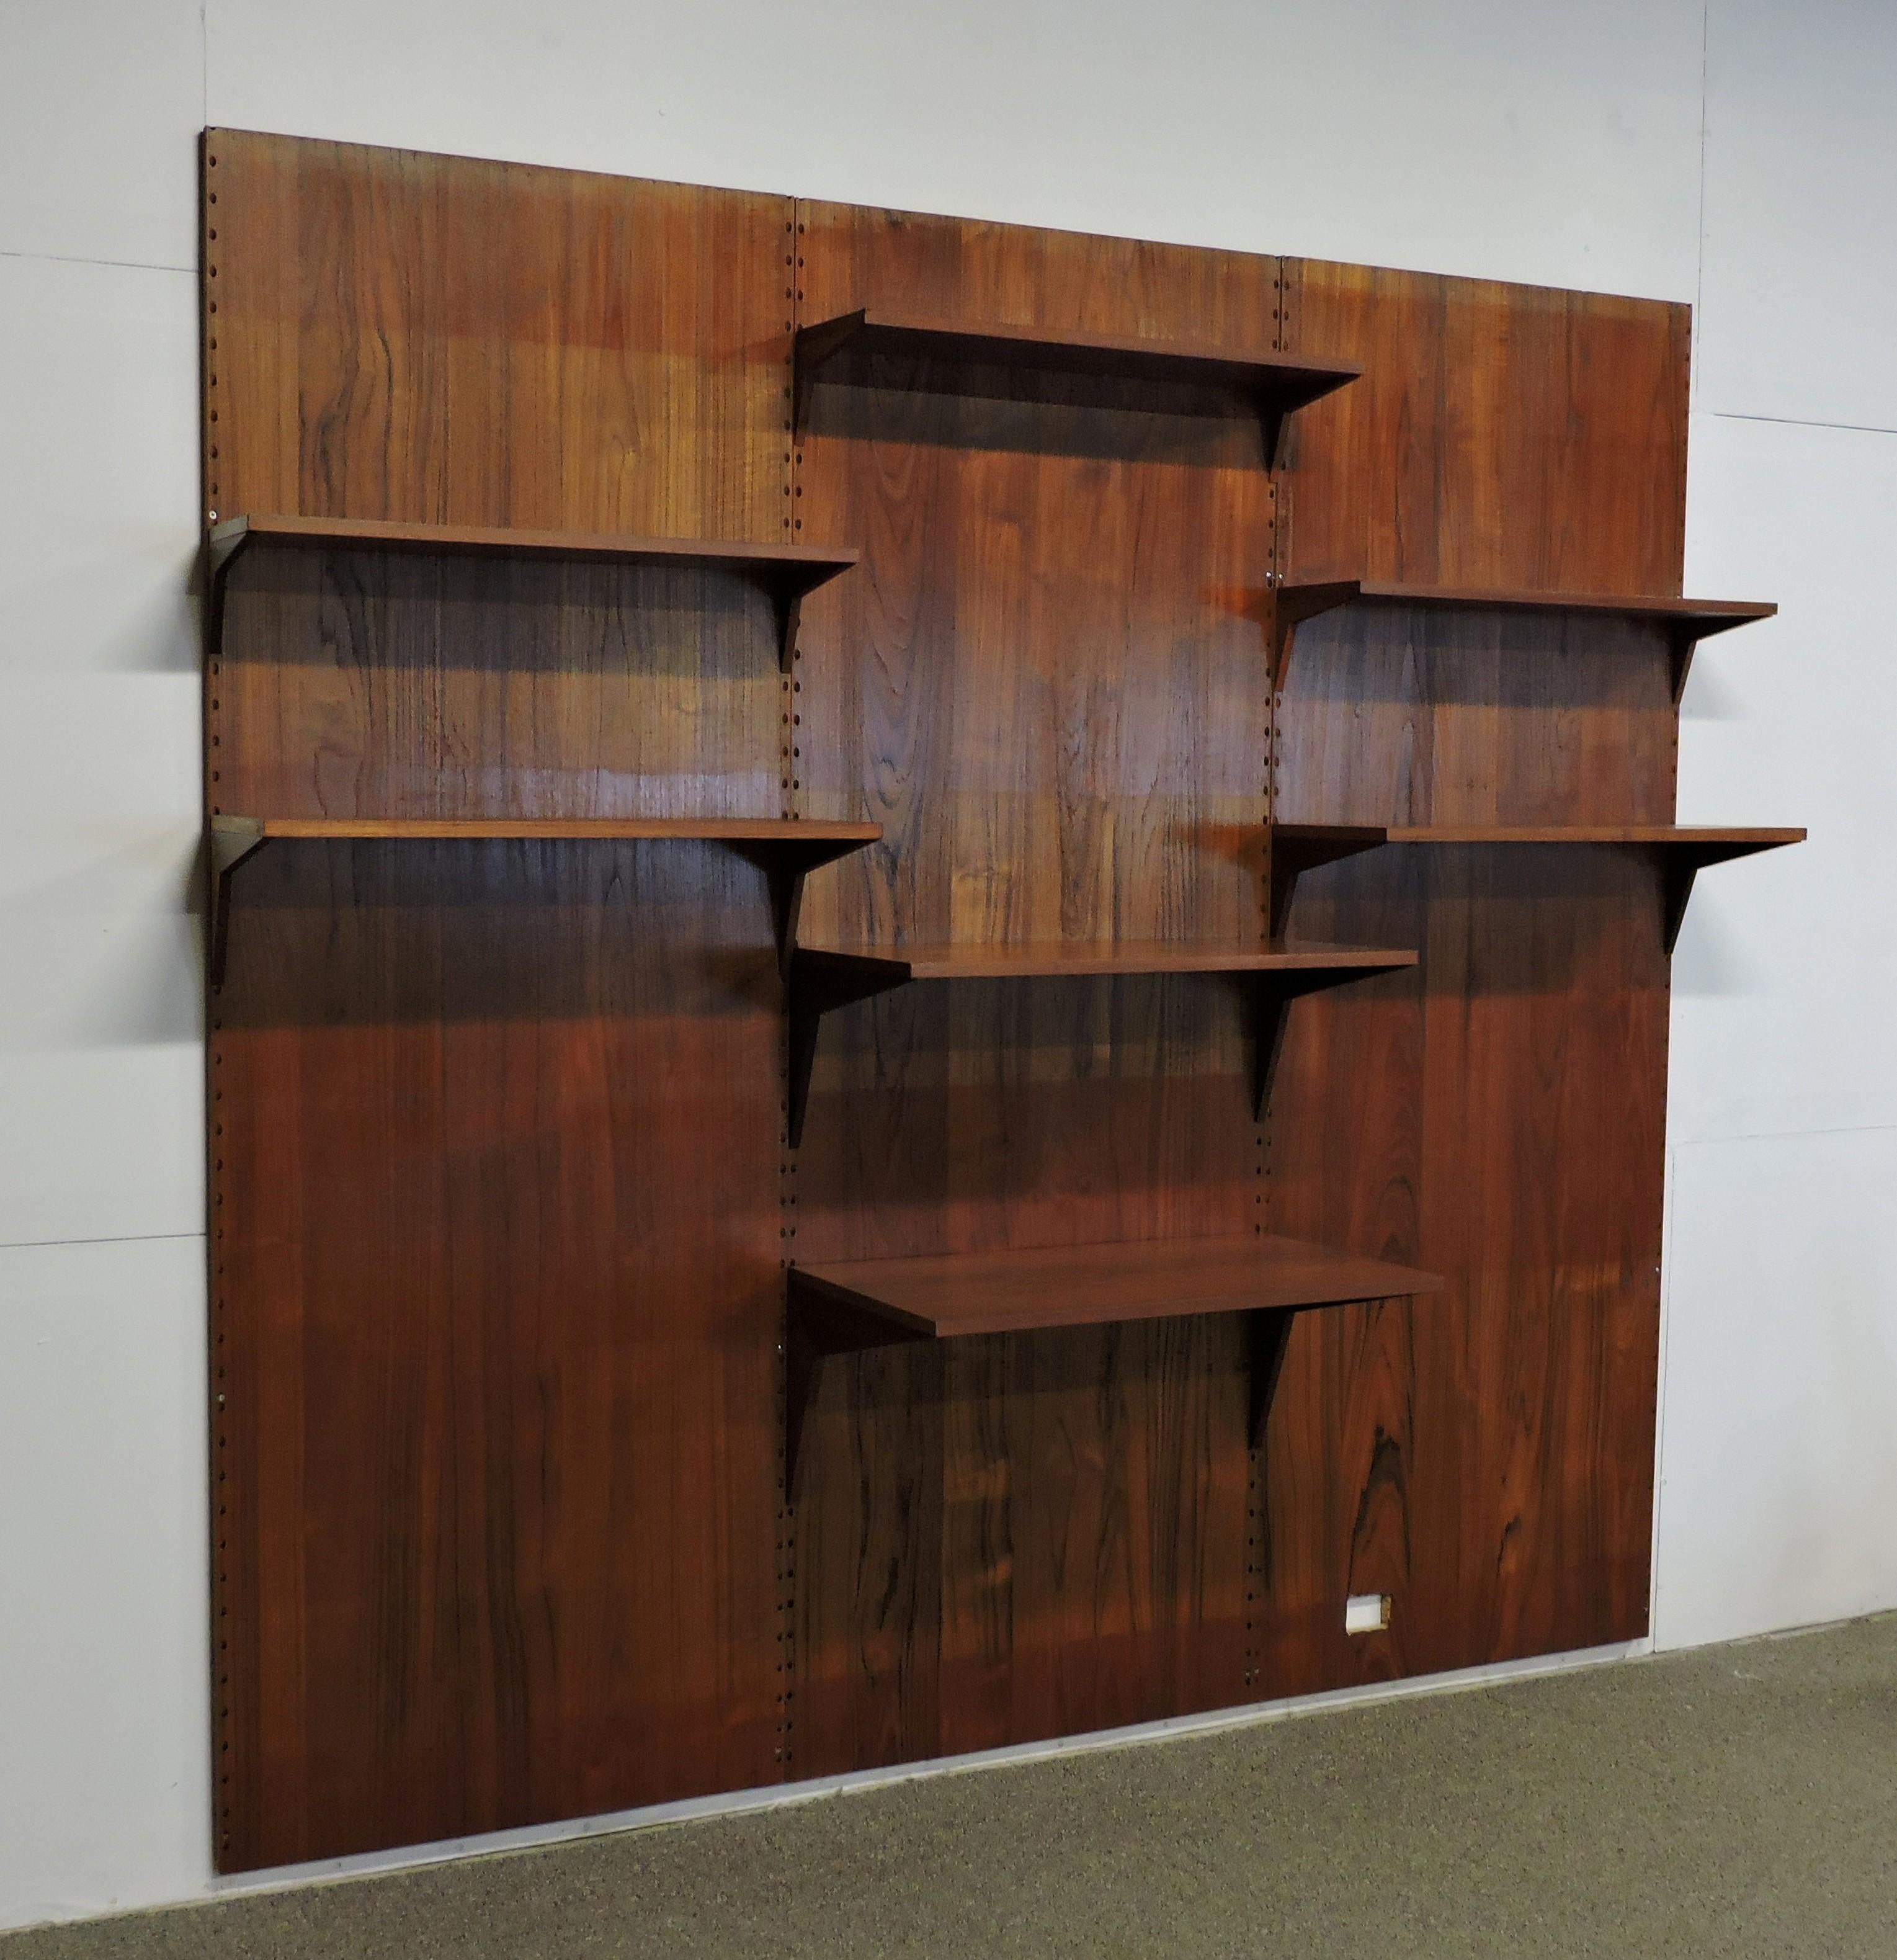 Large three bay teak Cado wall system designed by Poul Cadovius and made in Denmark. This unit has beautiful color and a nice active grain pattern, and includes three wall panels for installation and 7 shelves, the largest of which could be used as